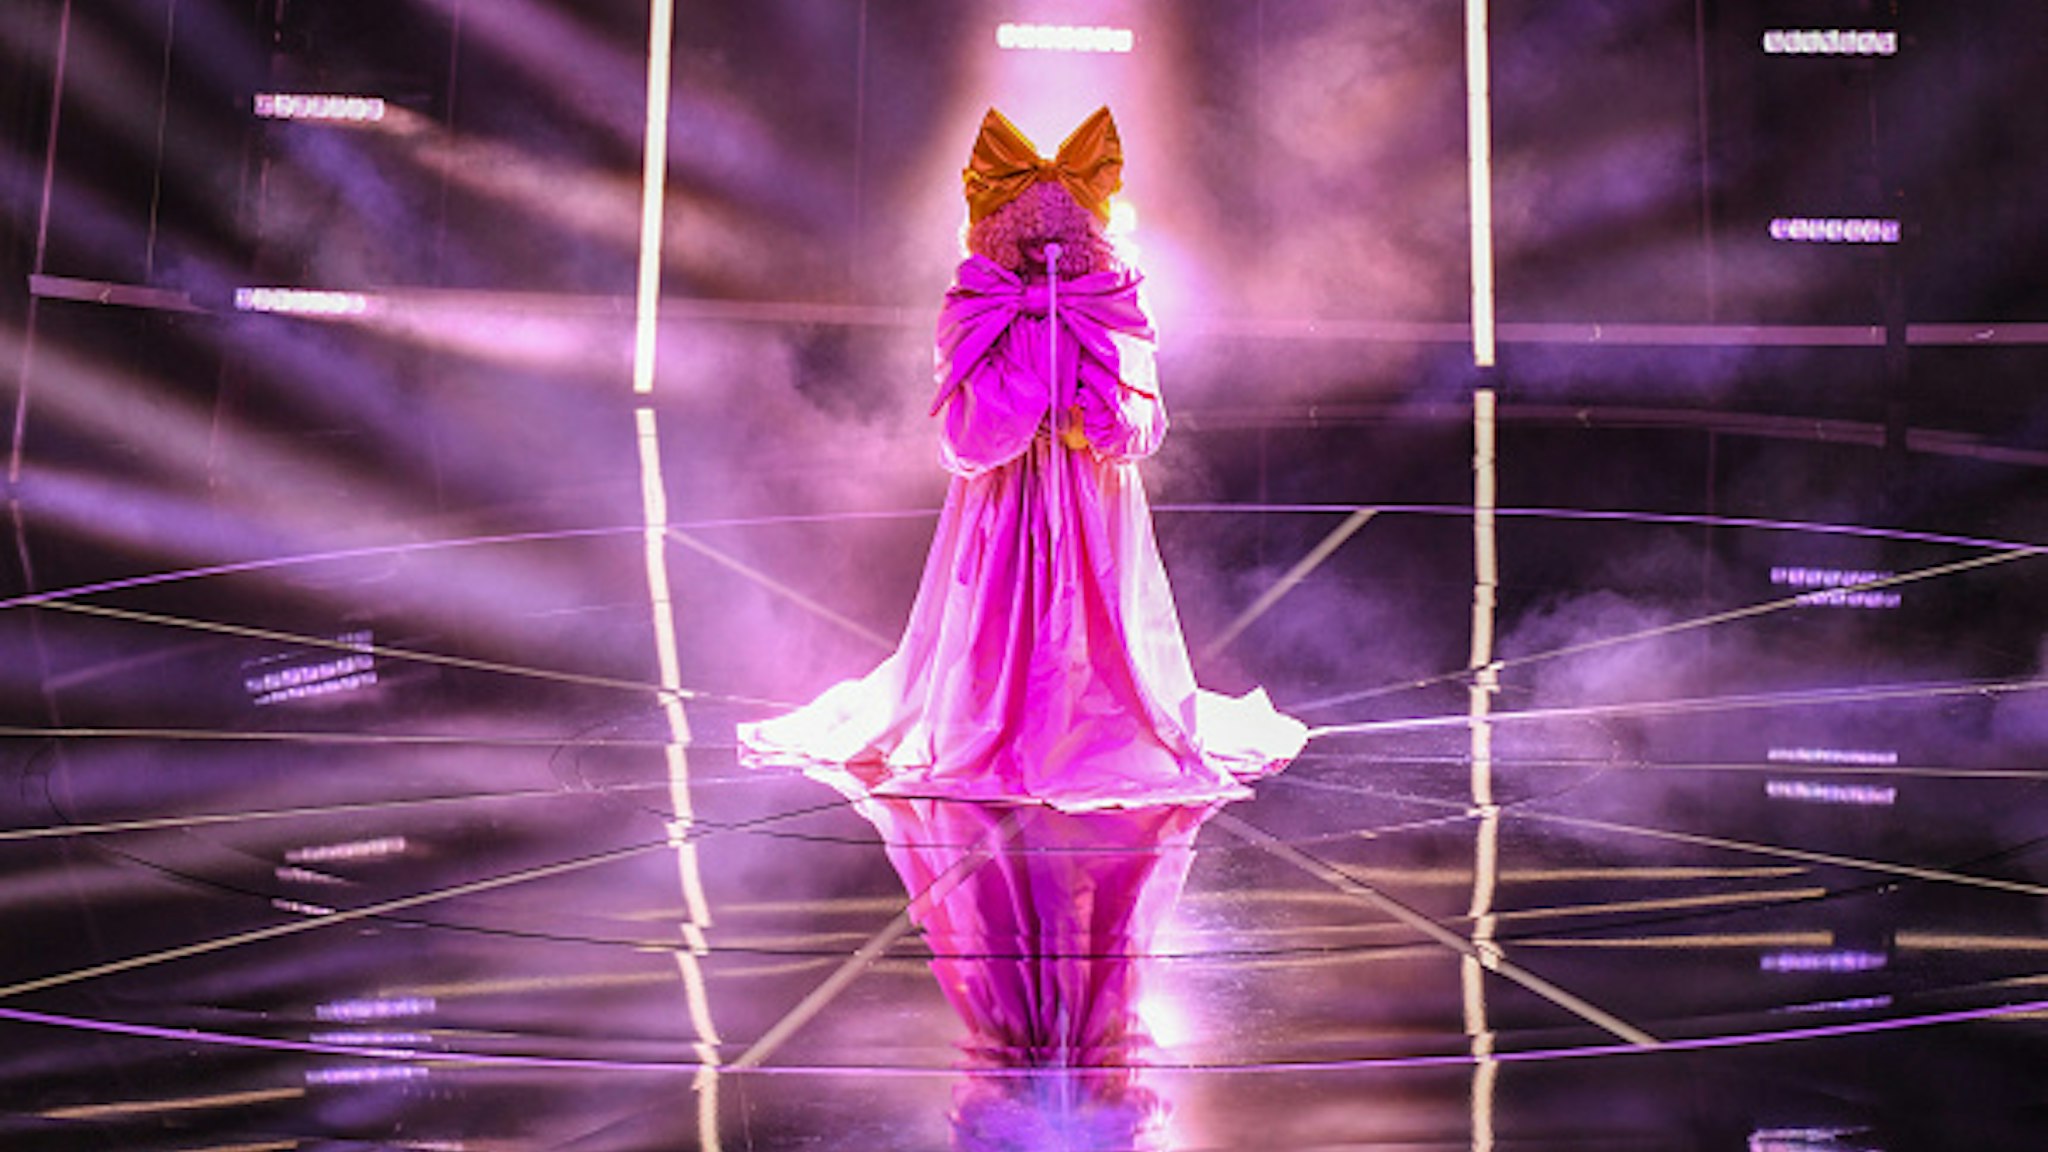 HOLLYWOOD, CALIFORNIA - OCTOBER 14: In this image released on October 14, Sia performs onstage at the 2020 Billboard Music Awards, broadcast on October 14, 2020 at the Dolby Theatre in Los Angeles, CA.